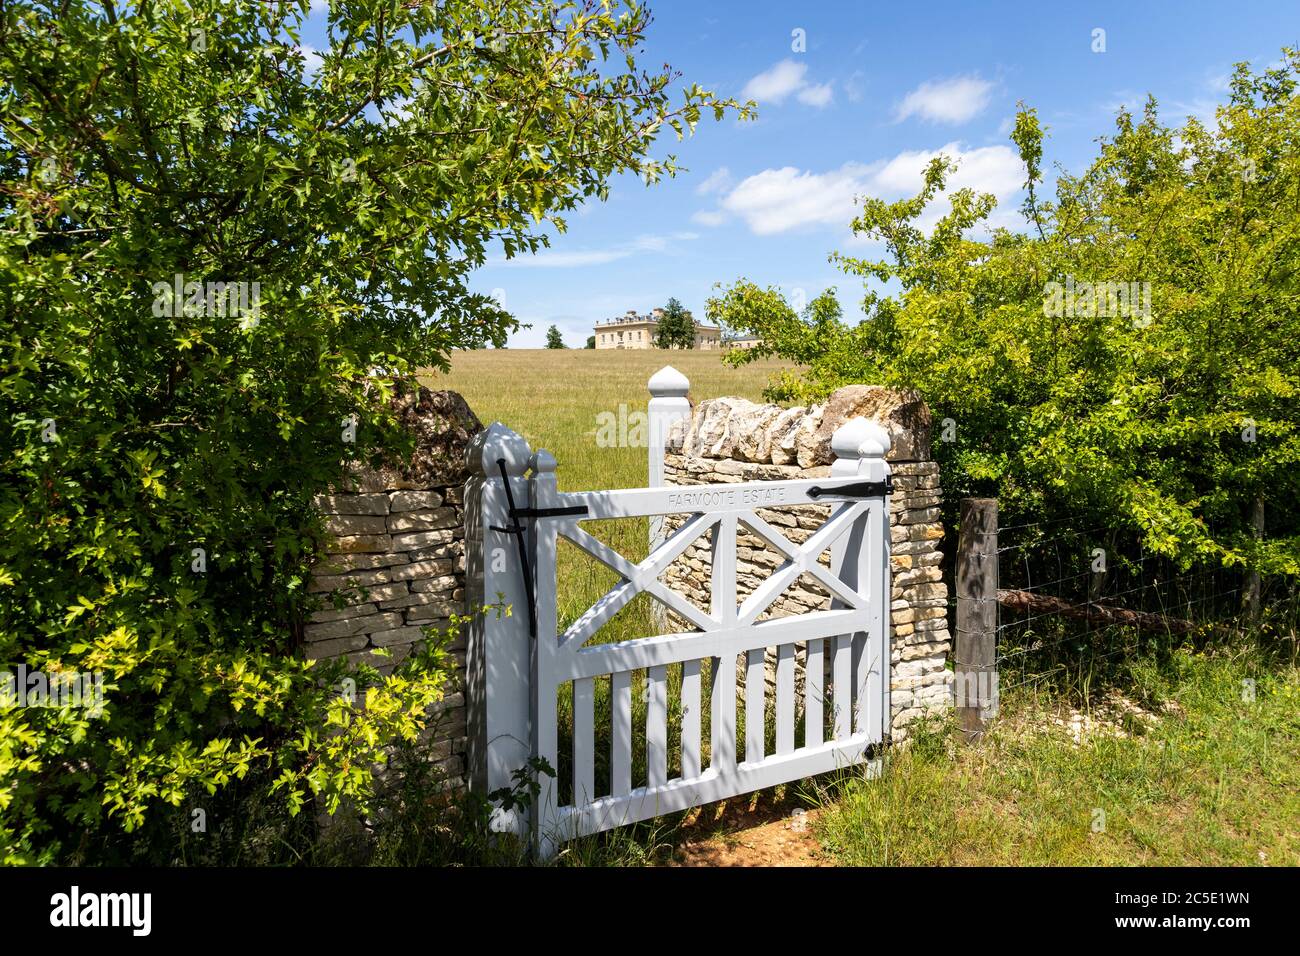 A glimpse of a classical country house built since 2012 on the Farmcote Estate viewed from Campden Lane on the Cotswold Hills, Gloucestershire UK. Stock Photo